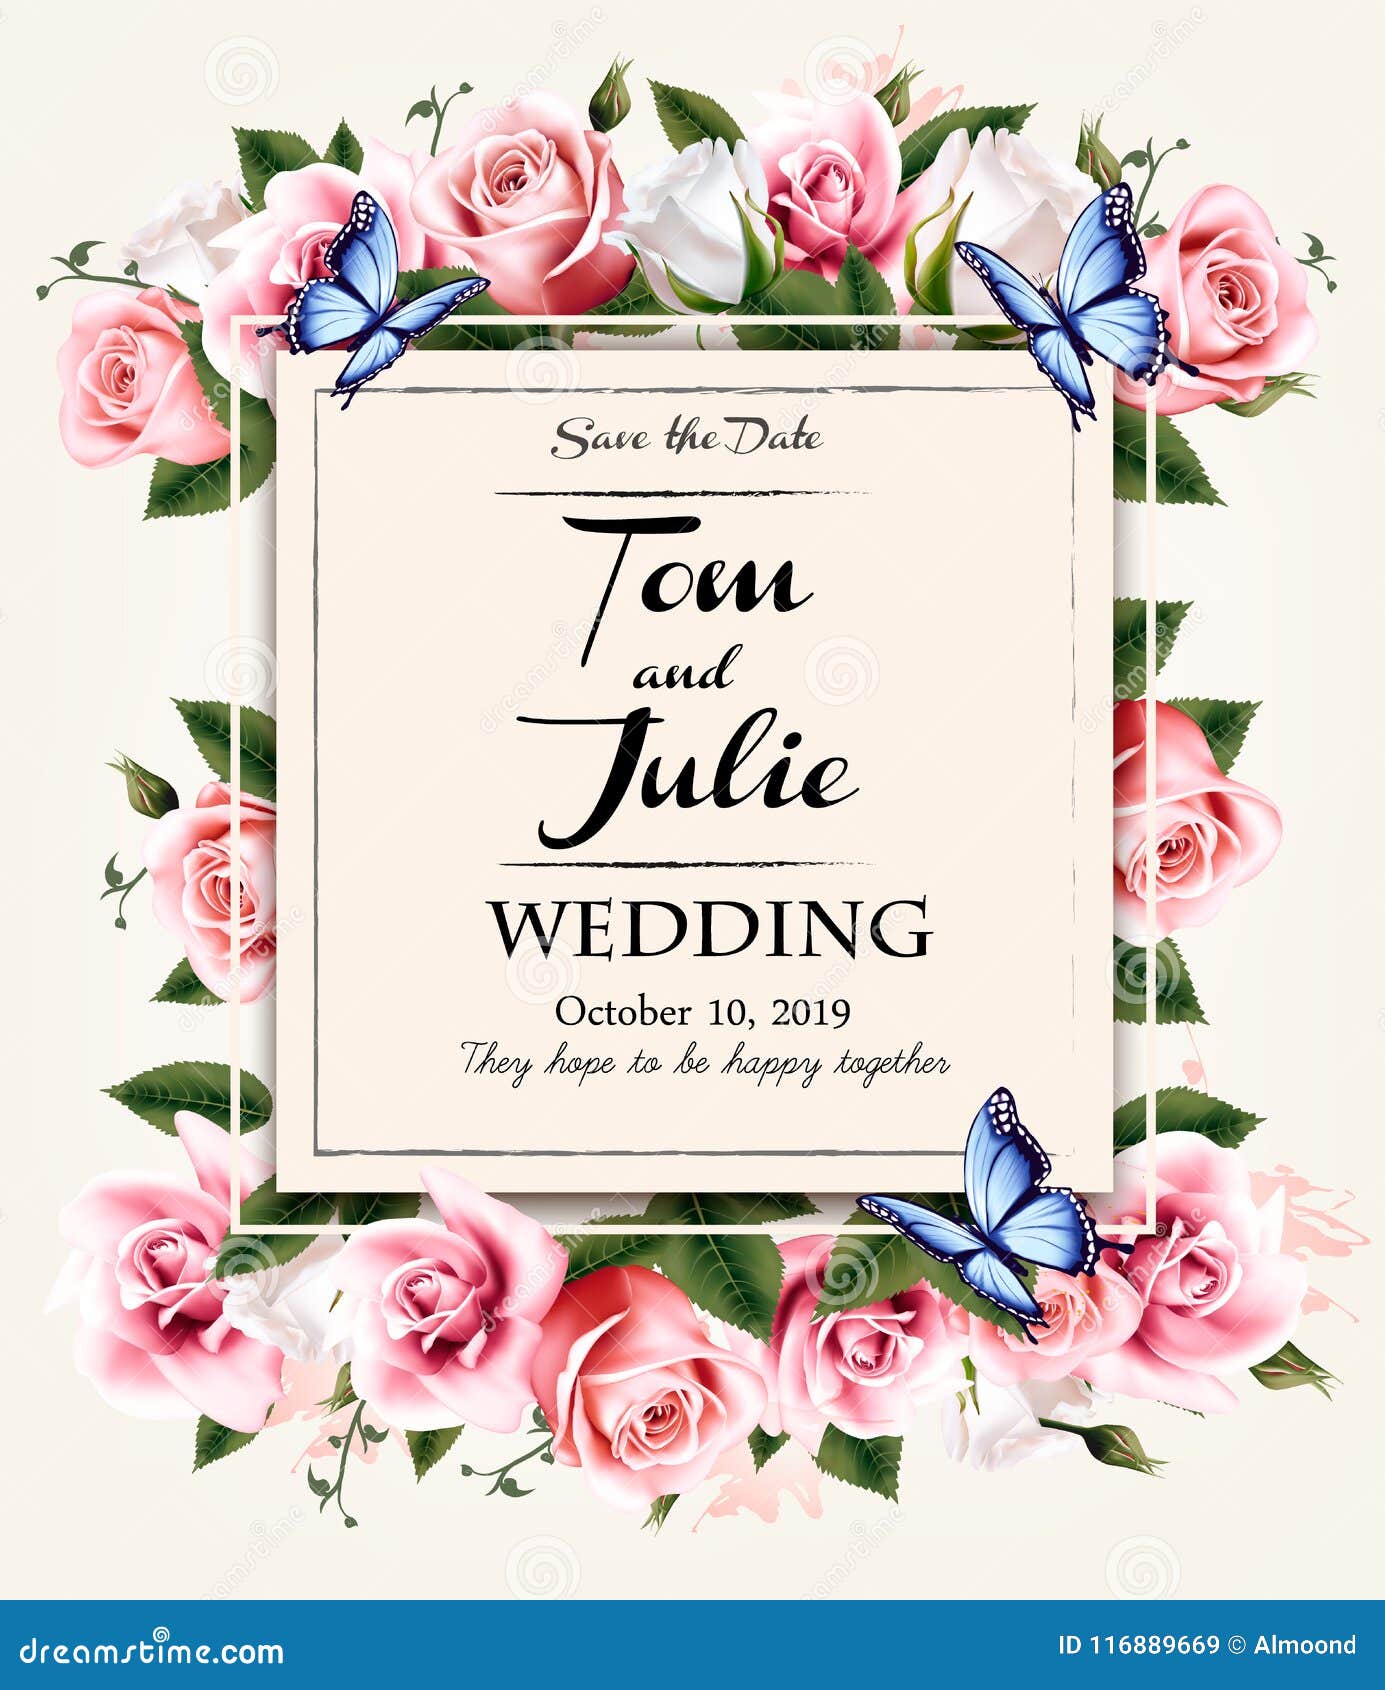 vintage wedding invitation desing with coloful flowers